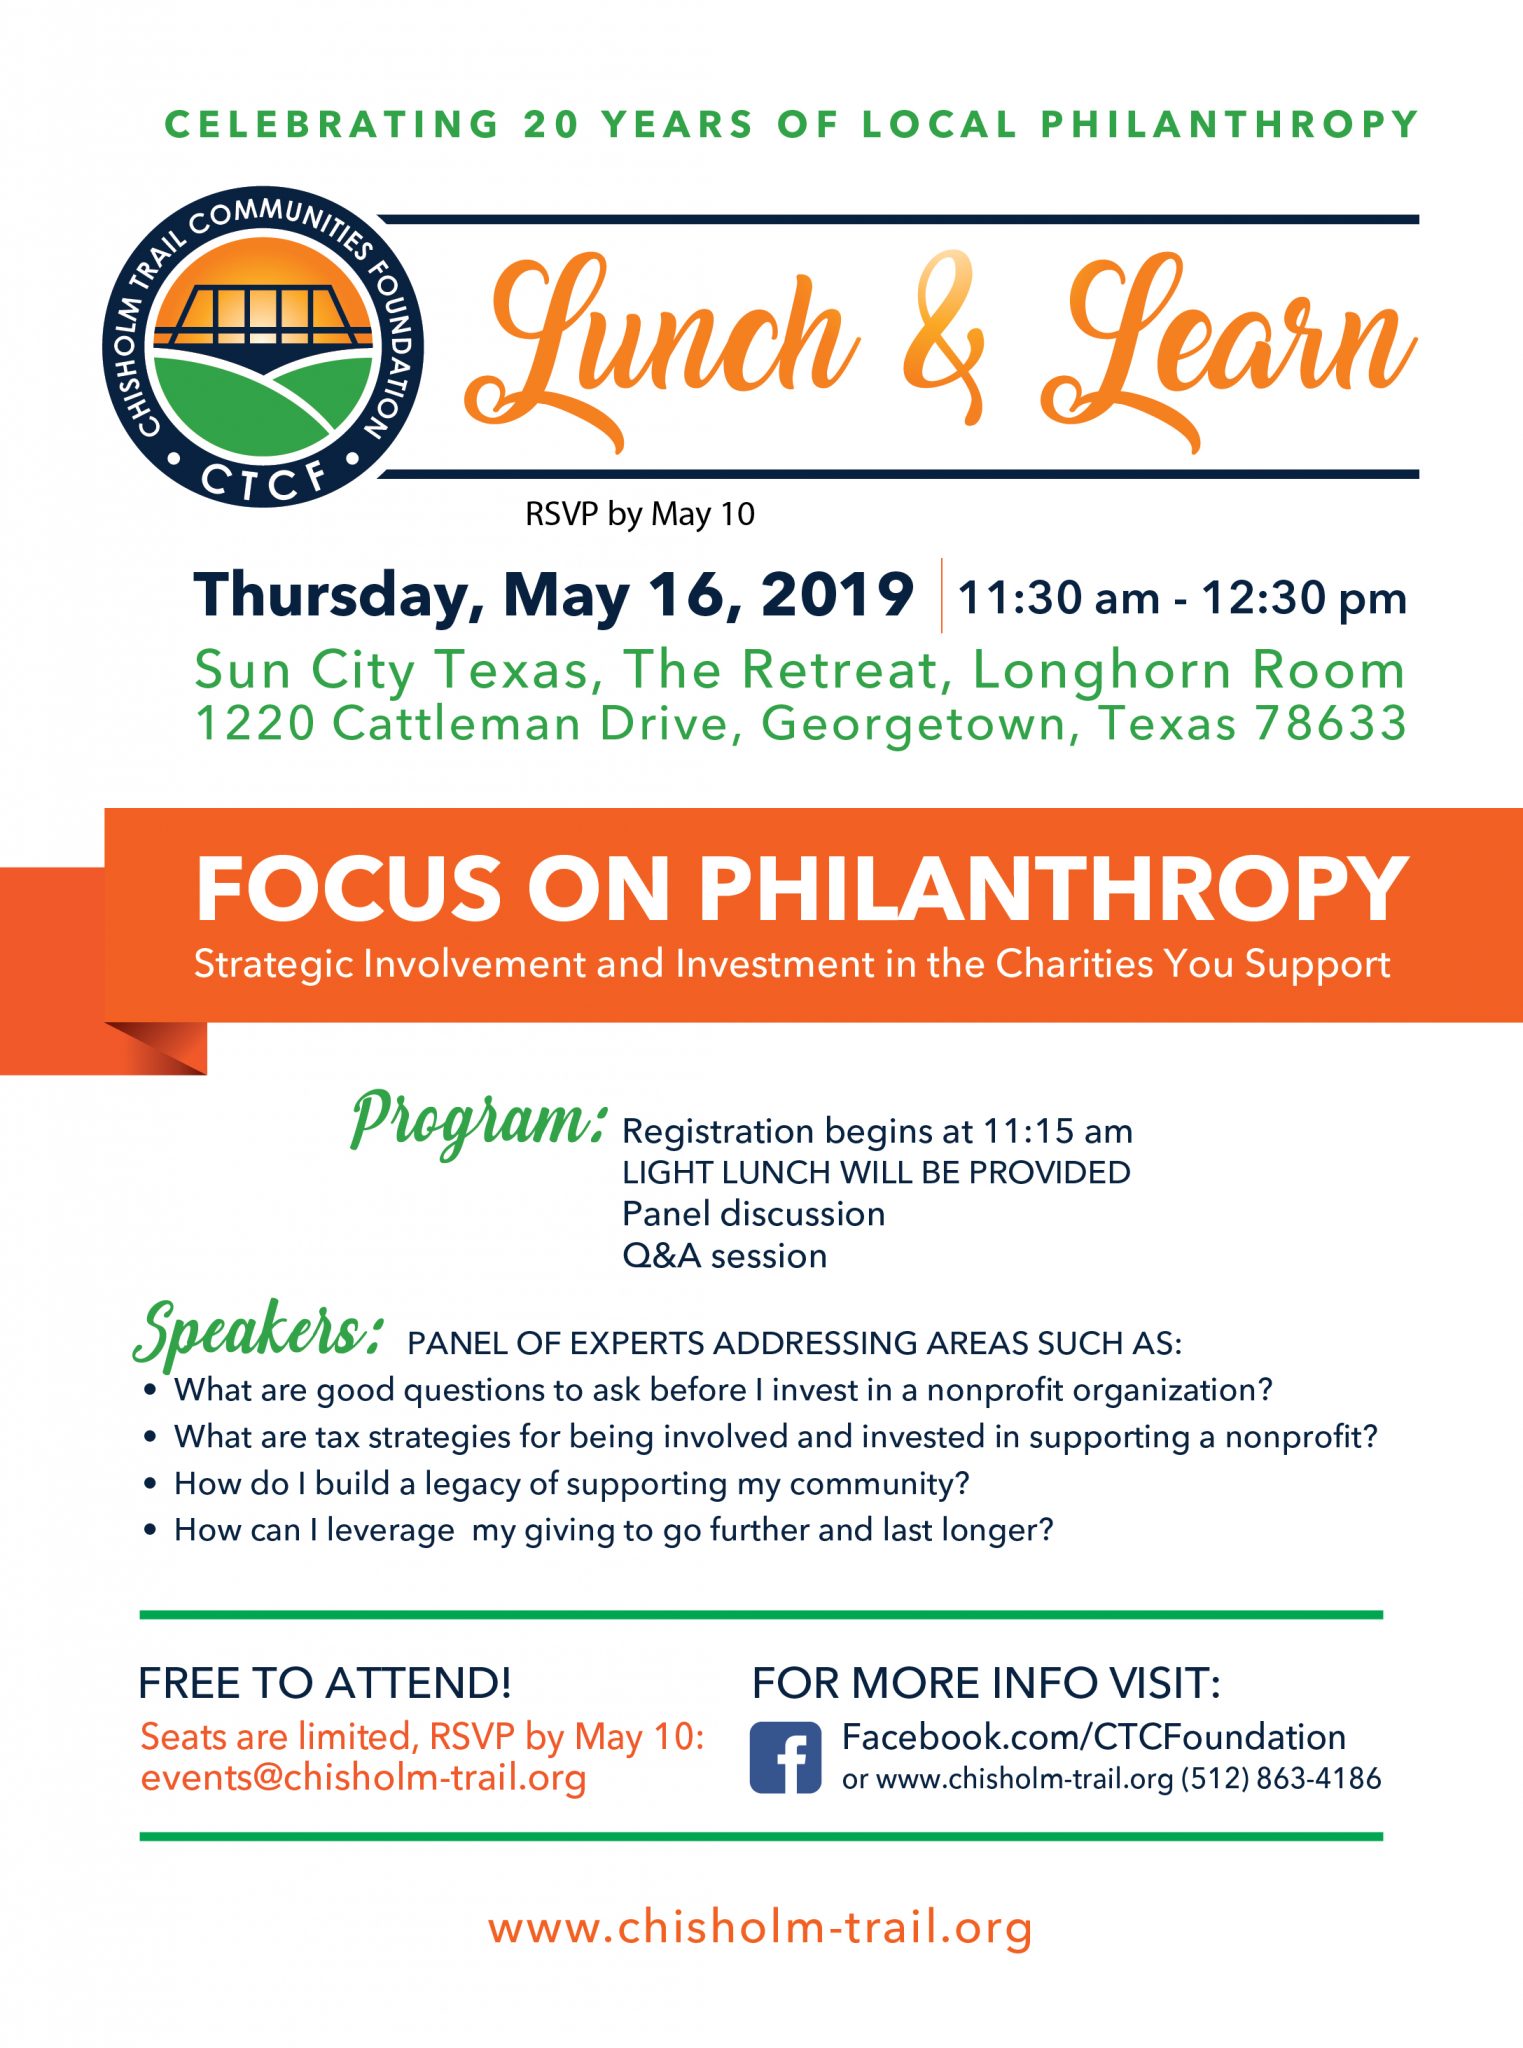 Lunch & Learn flyer - RSVP by May 10